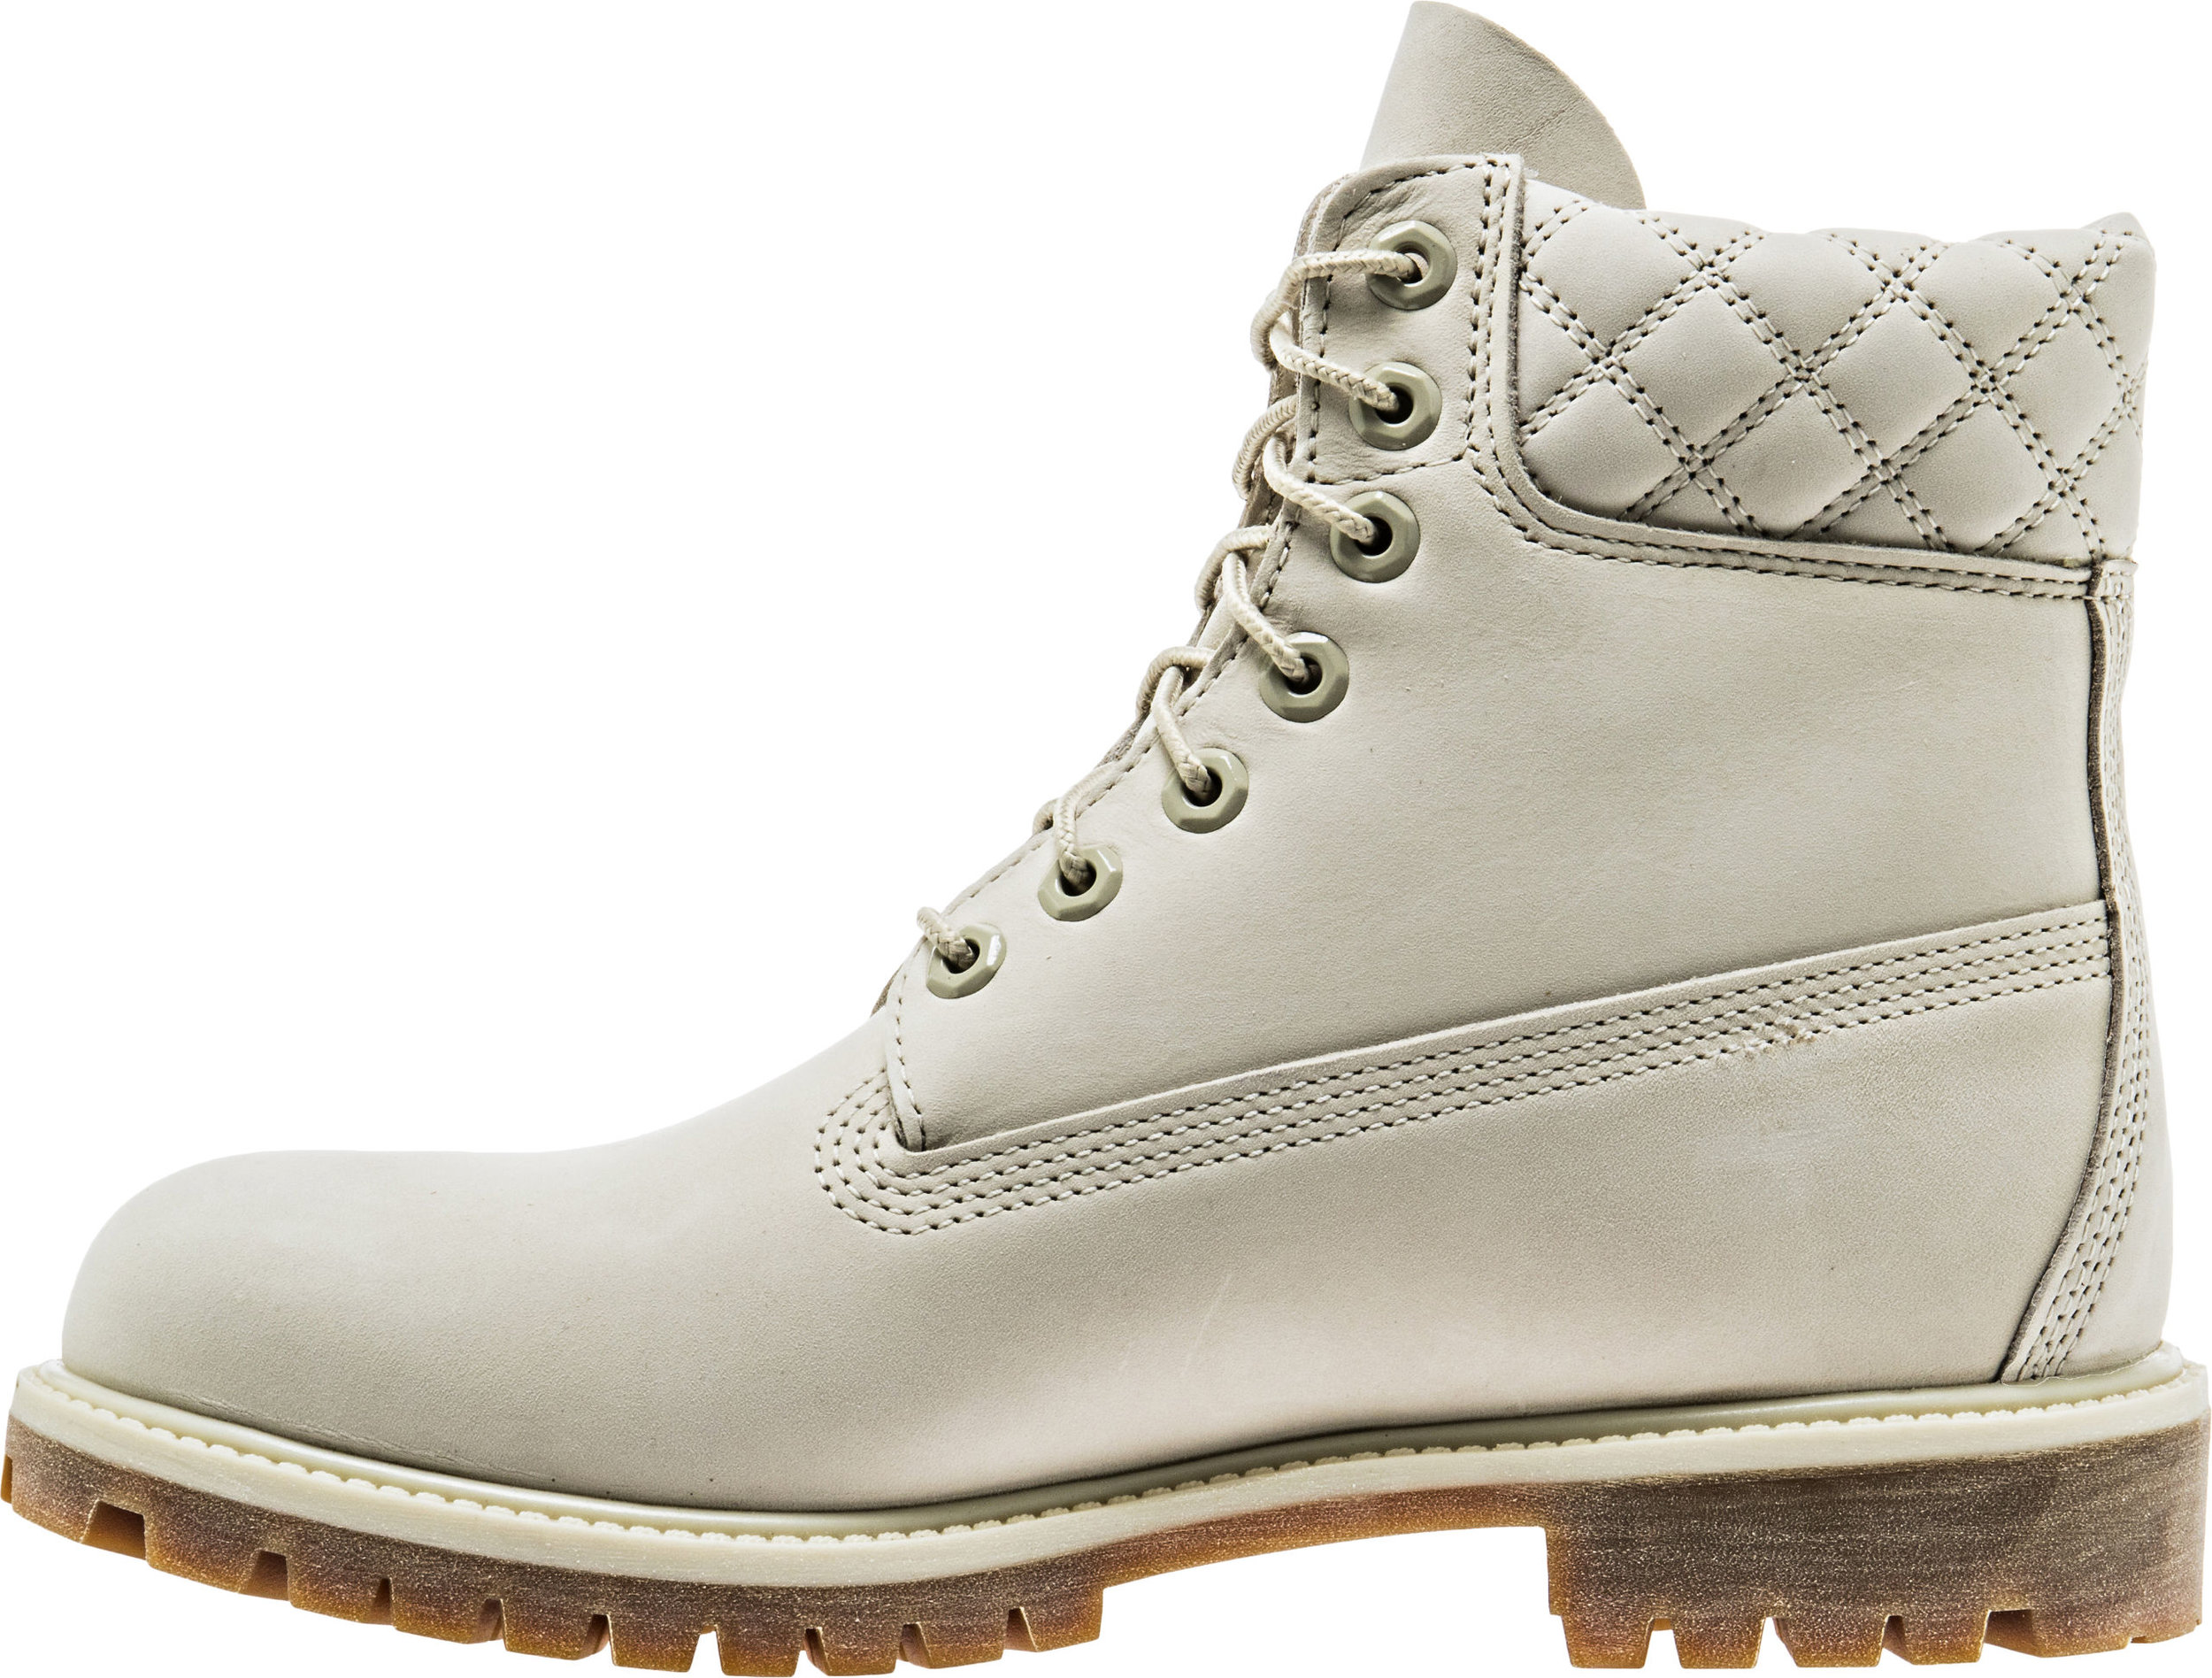 Now Available: ShoePalace x Timberland 6-inch Boot 